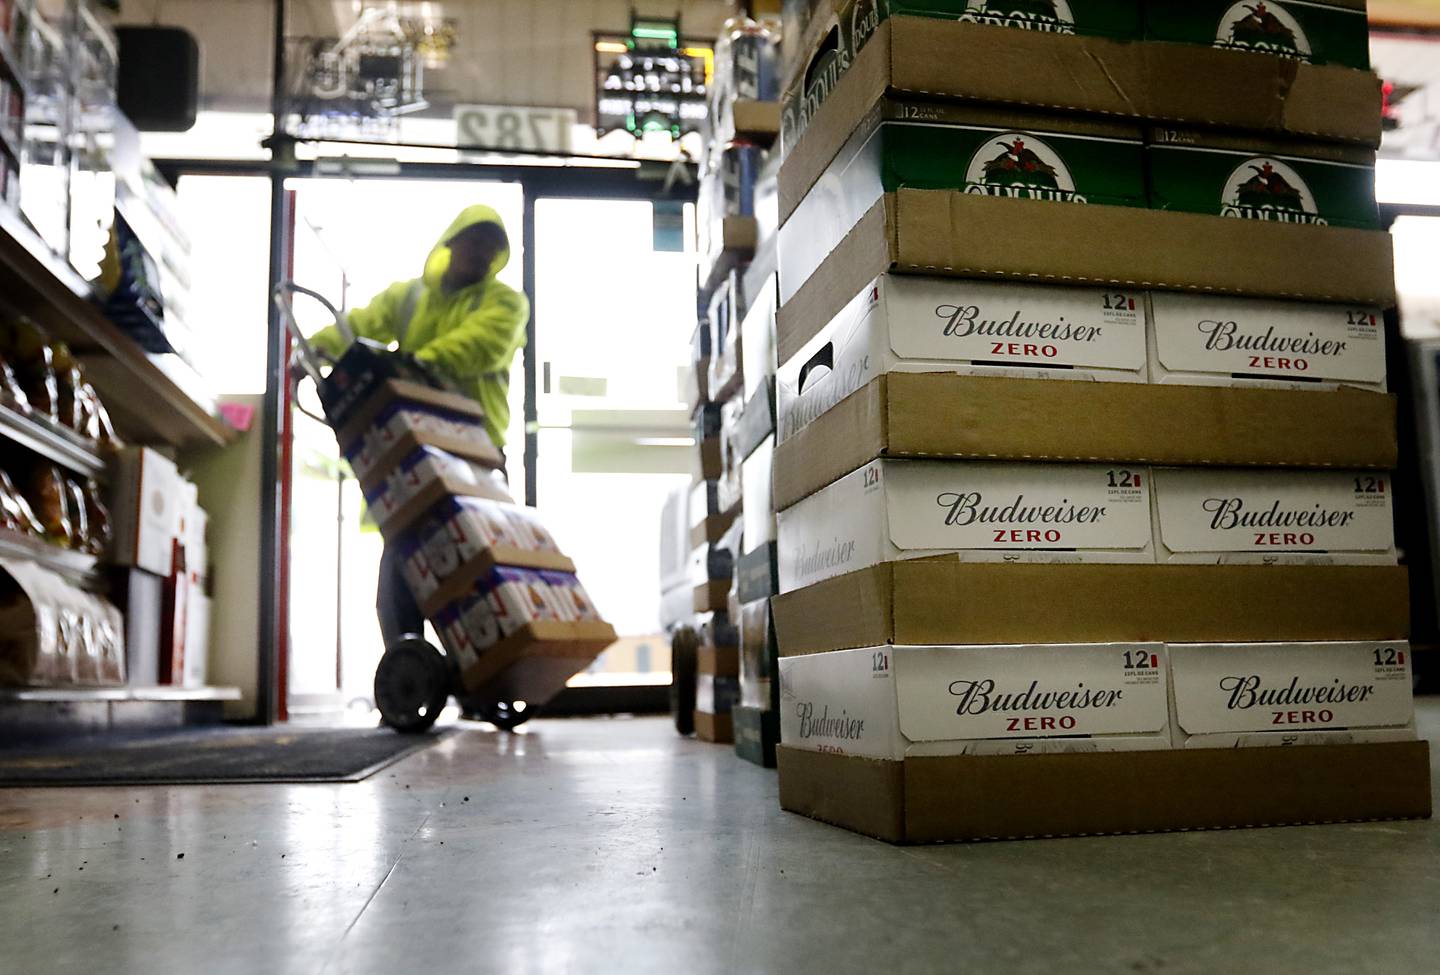 Patrick Hoff, of Lakeshore Beverage, delivers beer and nonalcoholic beer to McHenry Liquors, 1782 N. Richmond Road, in McHenry on Thursday, Jan. 5, 2023. The liquor store has a whole section dedicated to nonalcoholic beer.